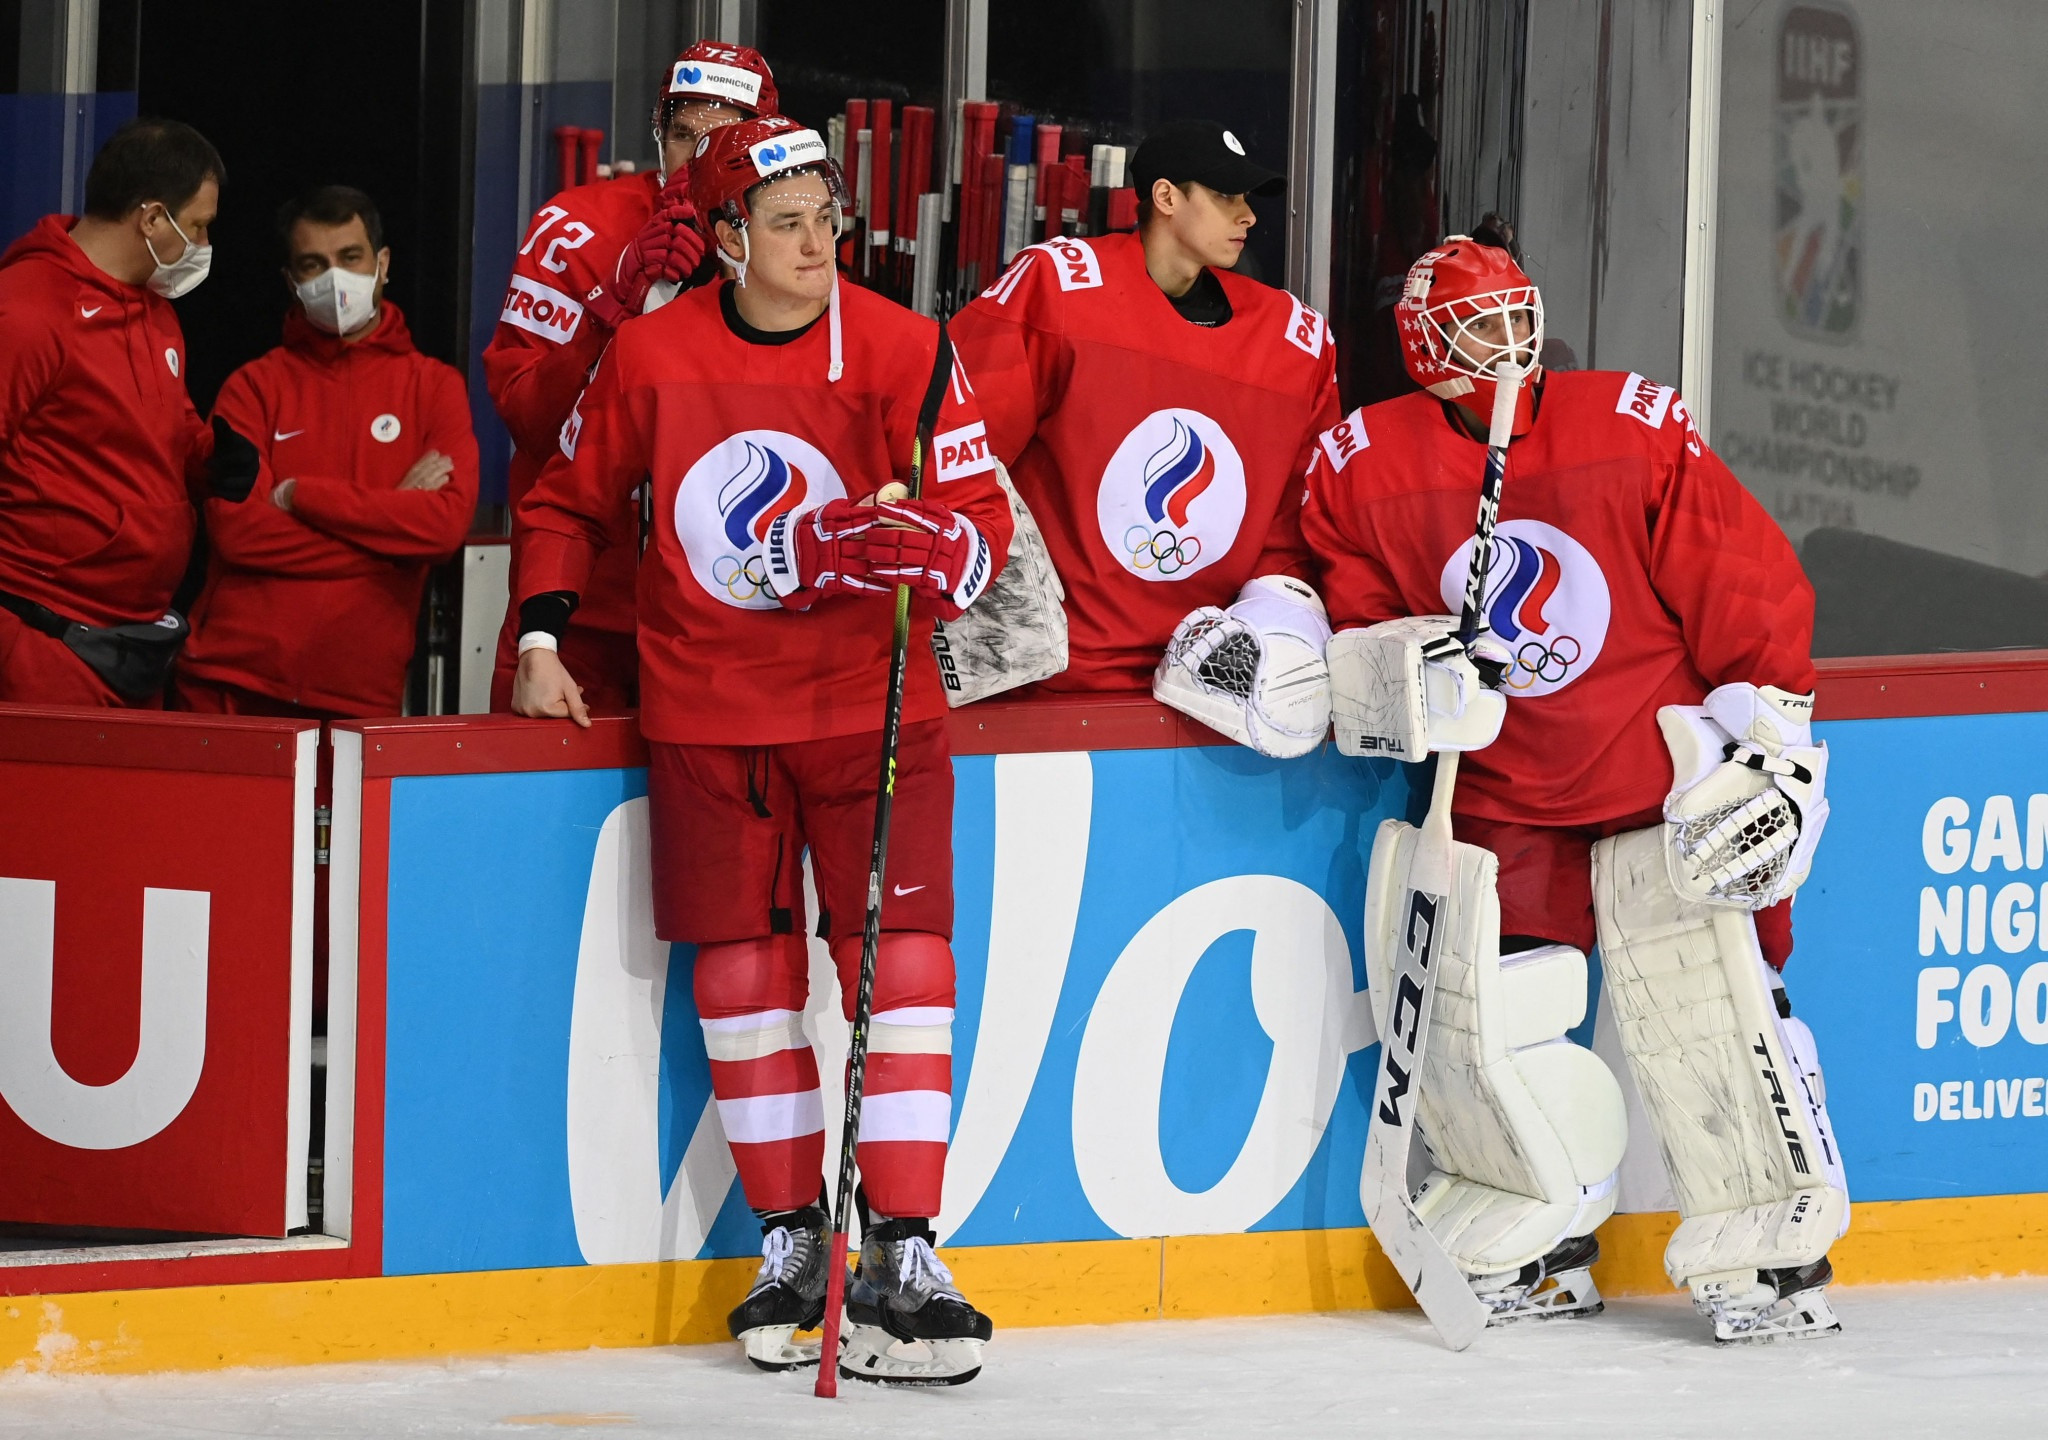 Russia have been banned from IIHF competition since February due to invasion of Ukraine ©Getty Images